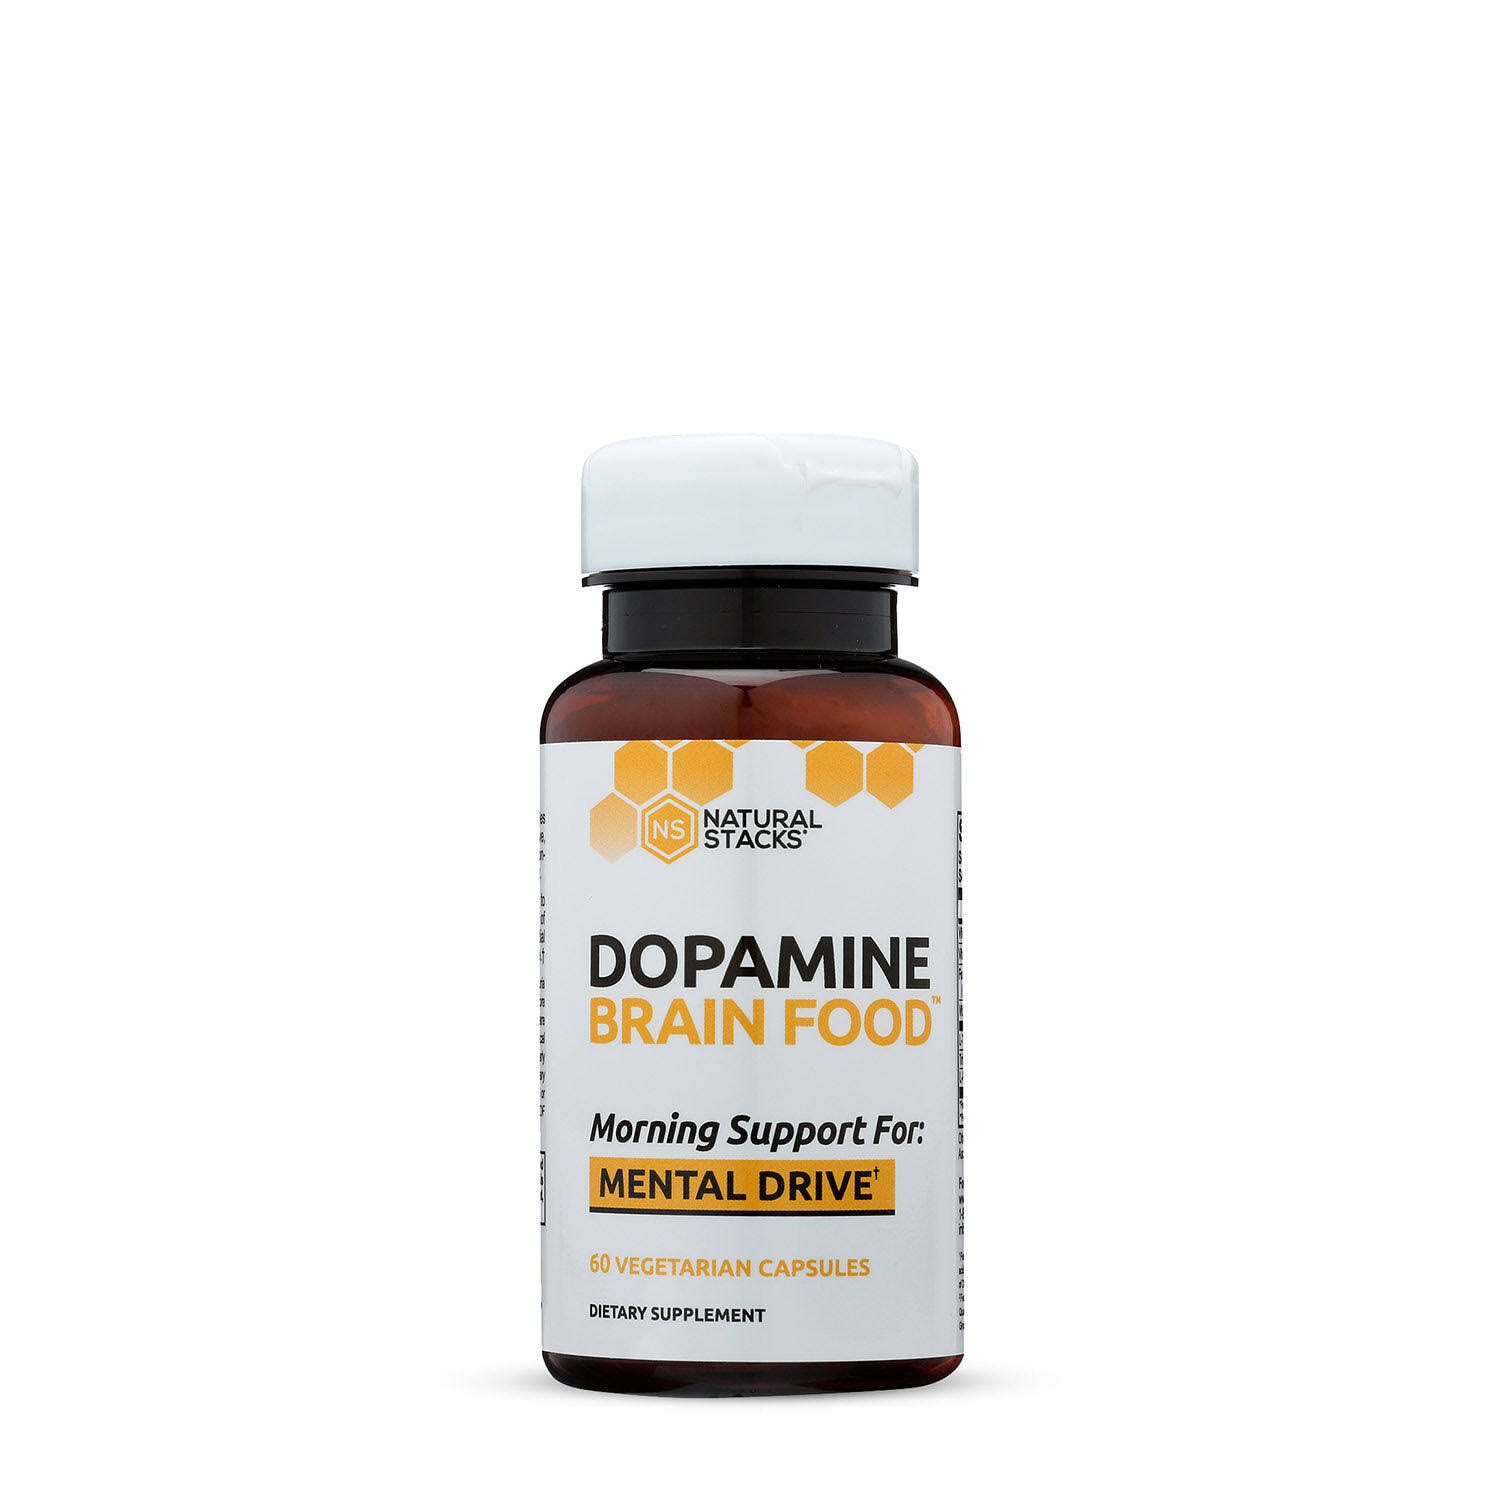 Natural Stacks Dopamine Brain Food Morning Support for: Mental Drive Dietary Supplement Vegetarian Capsules - 60 ct